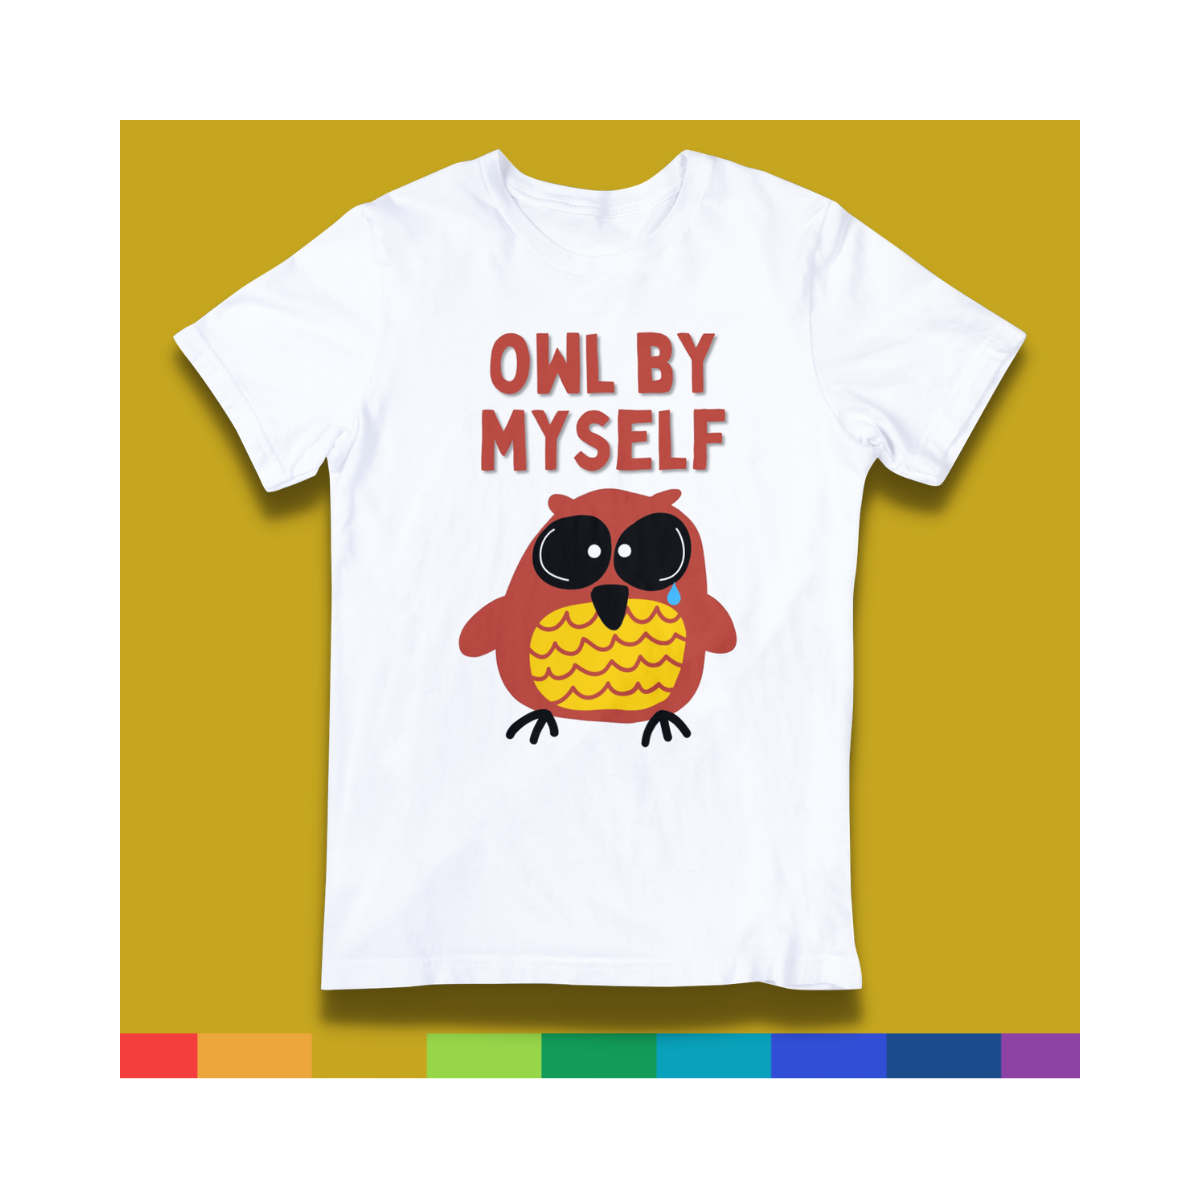 Punny T-shirt - "Owl By Myself"